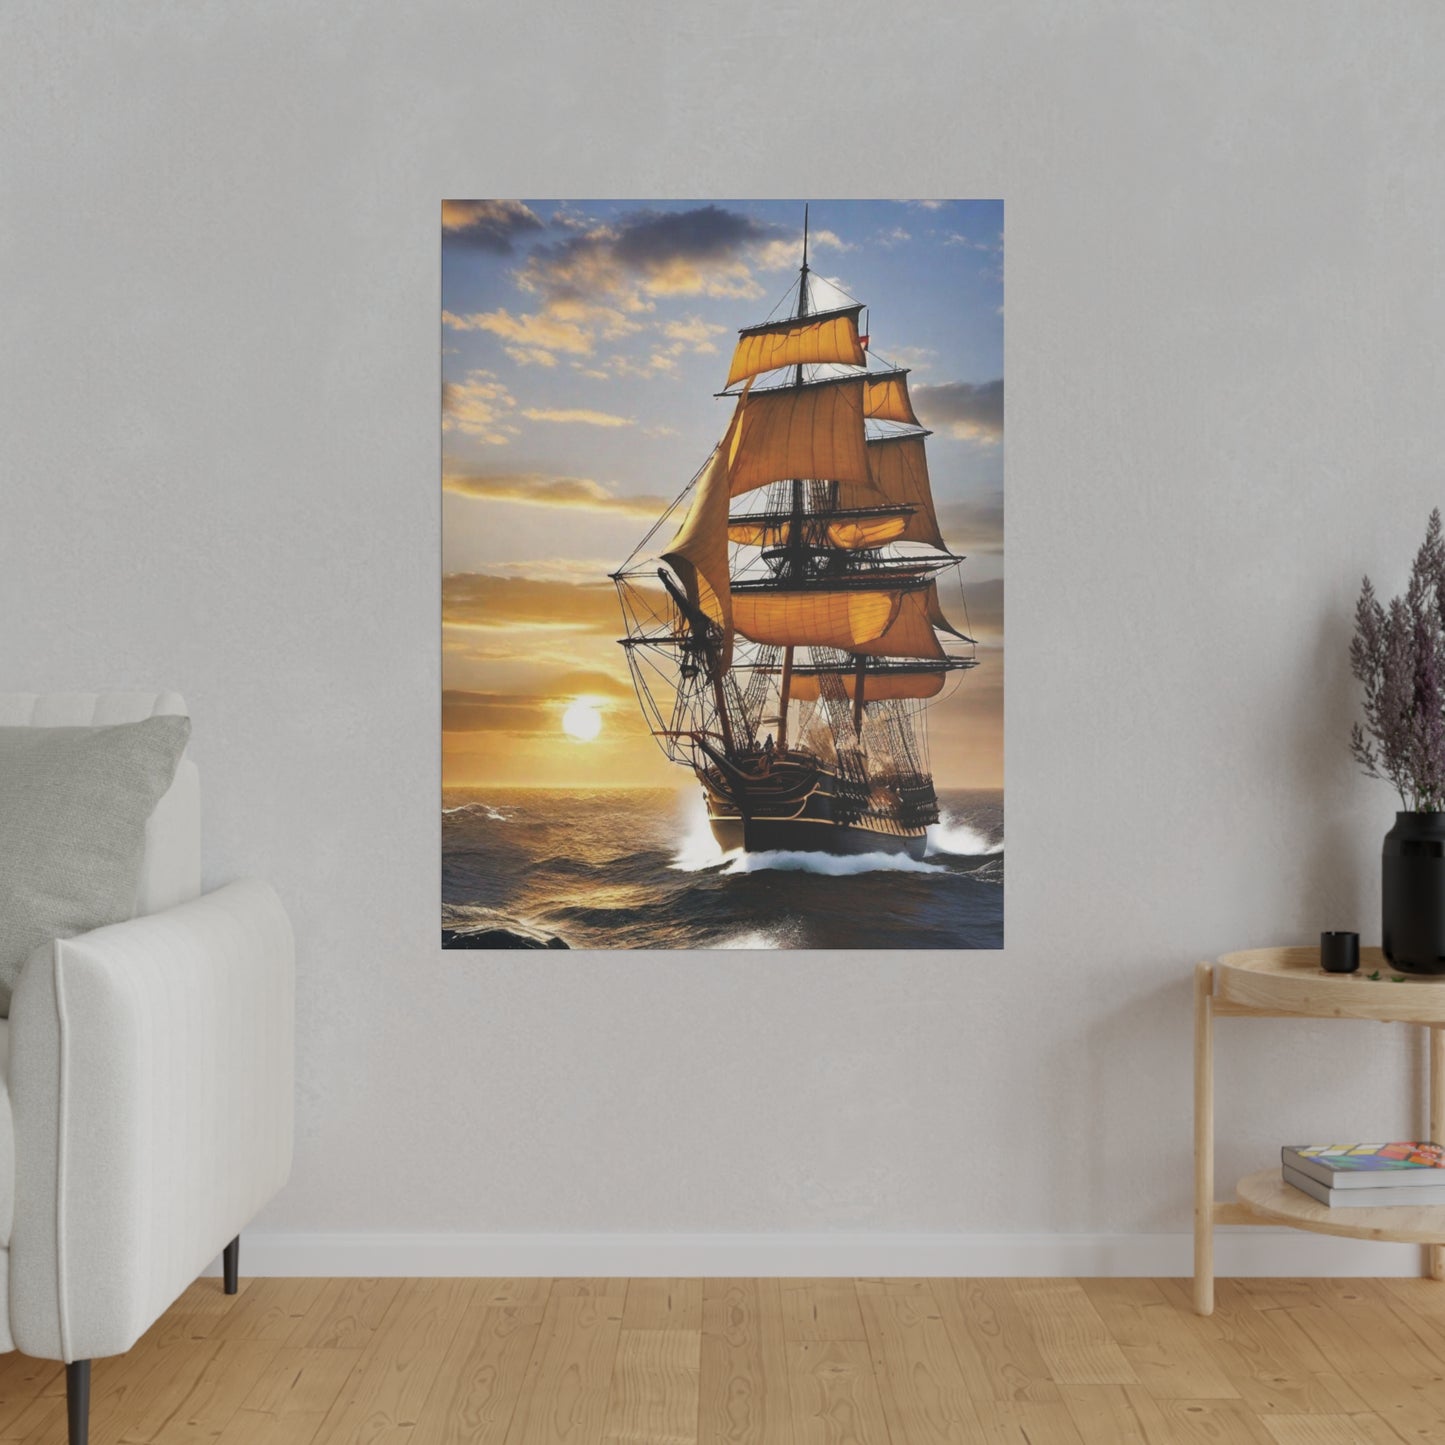 Experience maritime history with our Wooden Ships Canvas. Sail through the ages with majestic man-of-war, embodying the timeless elegance of the Age of Sail. Perfect for enthusiasts and history lovers alike.